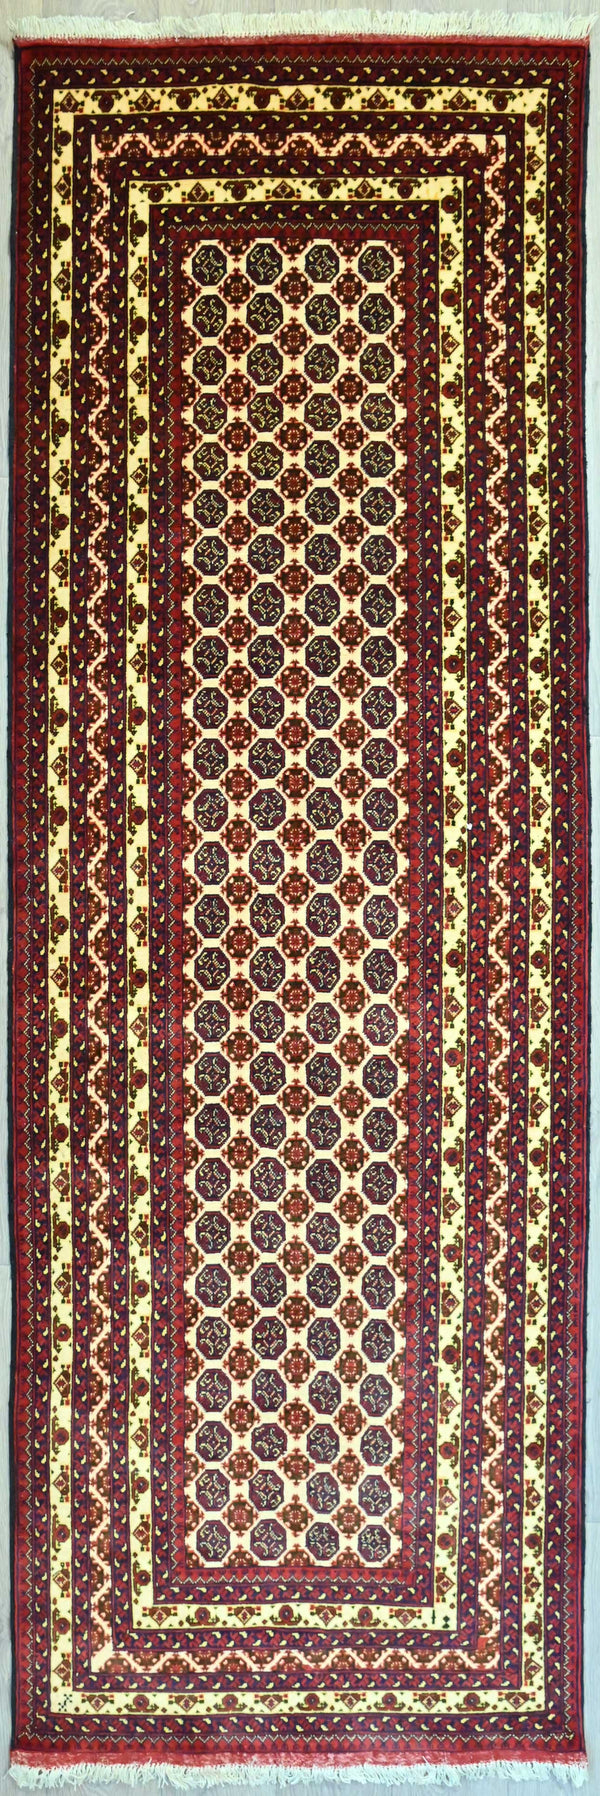 Finely Handwoven Pure Wool Afghan Mowri Gul Runner w/ Cream and Red Tones - (296H x 96W)